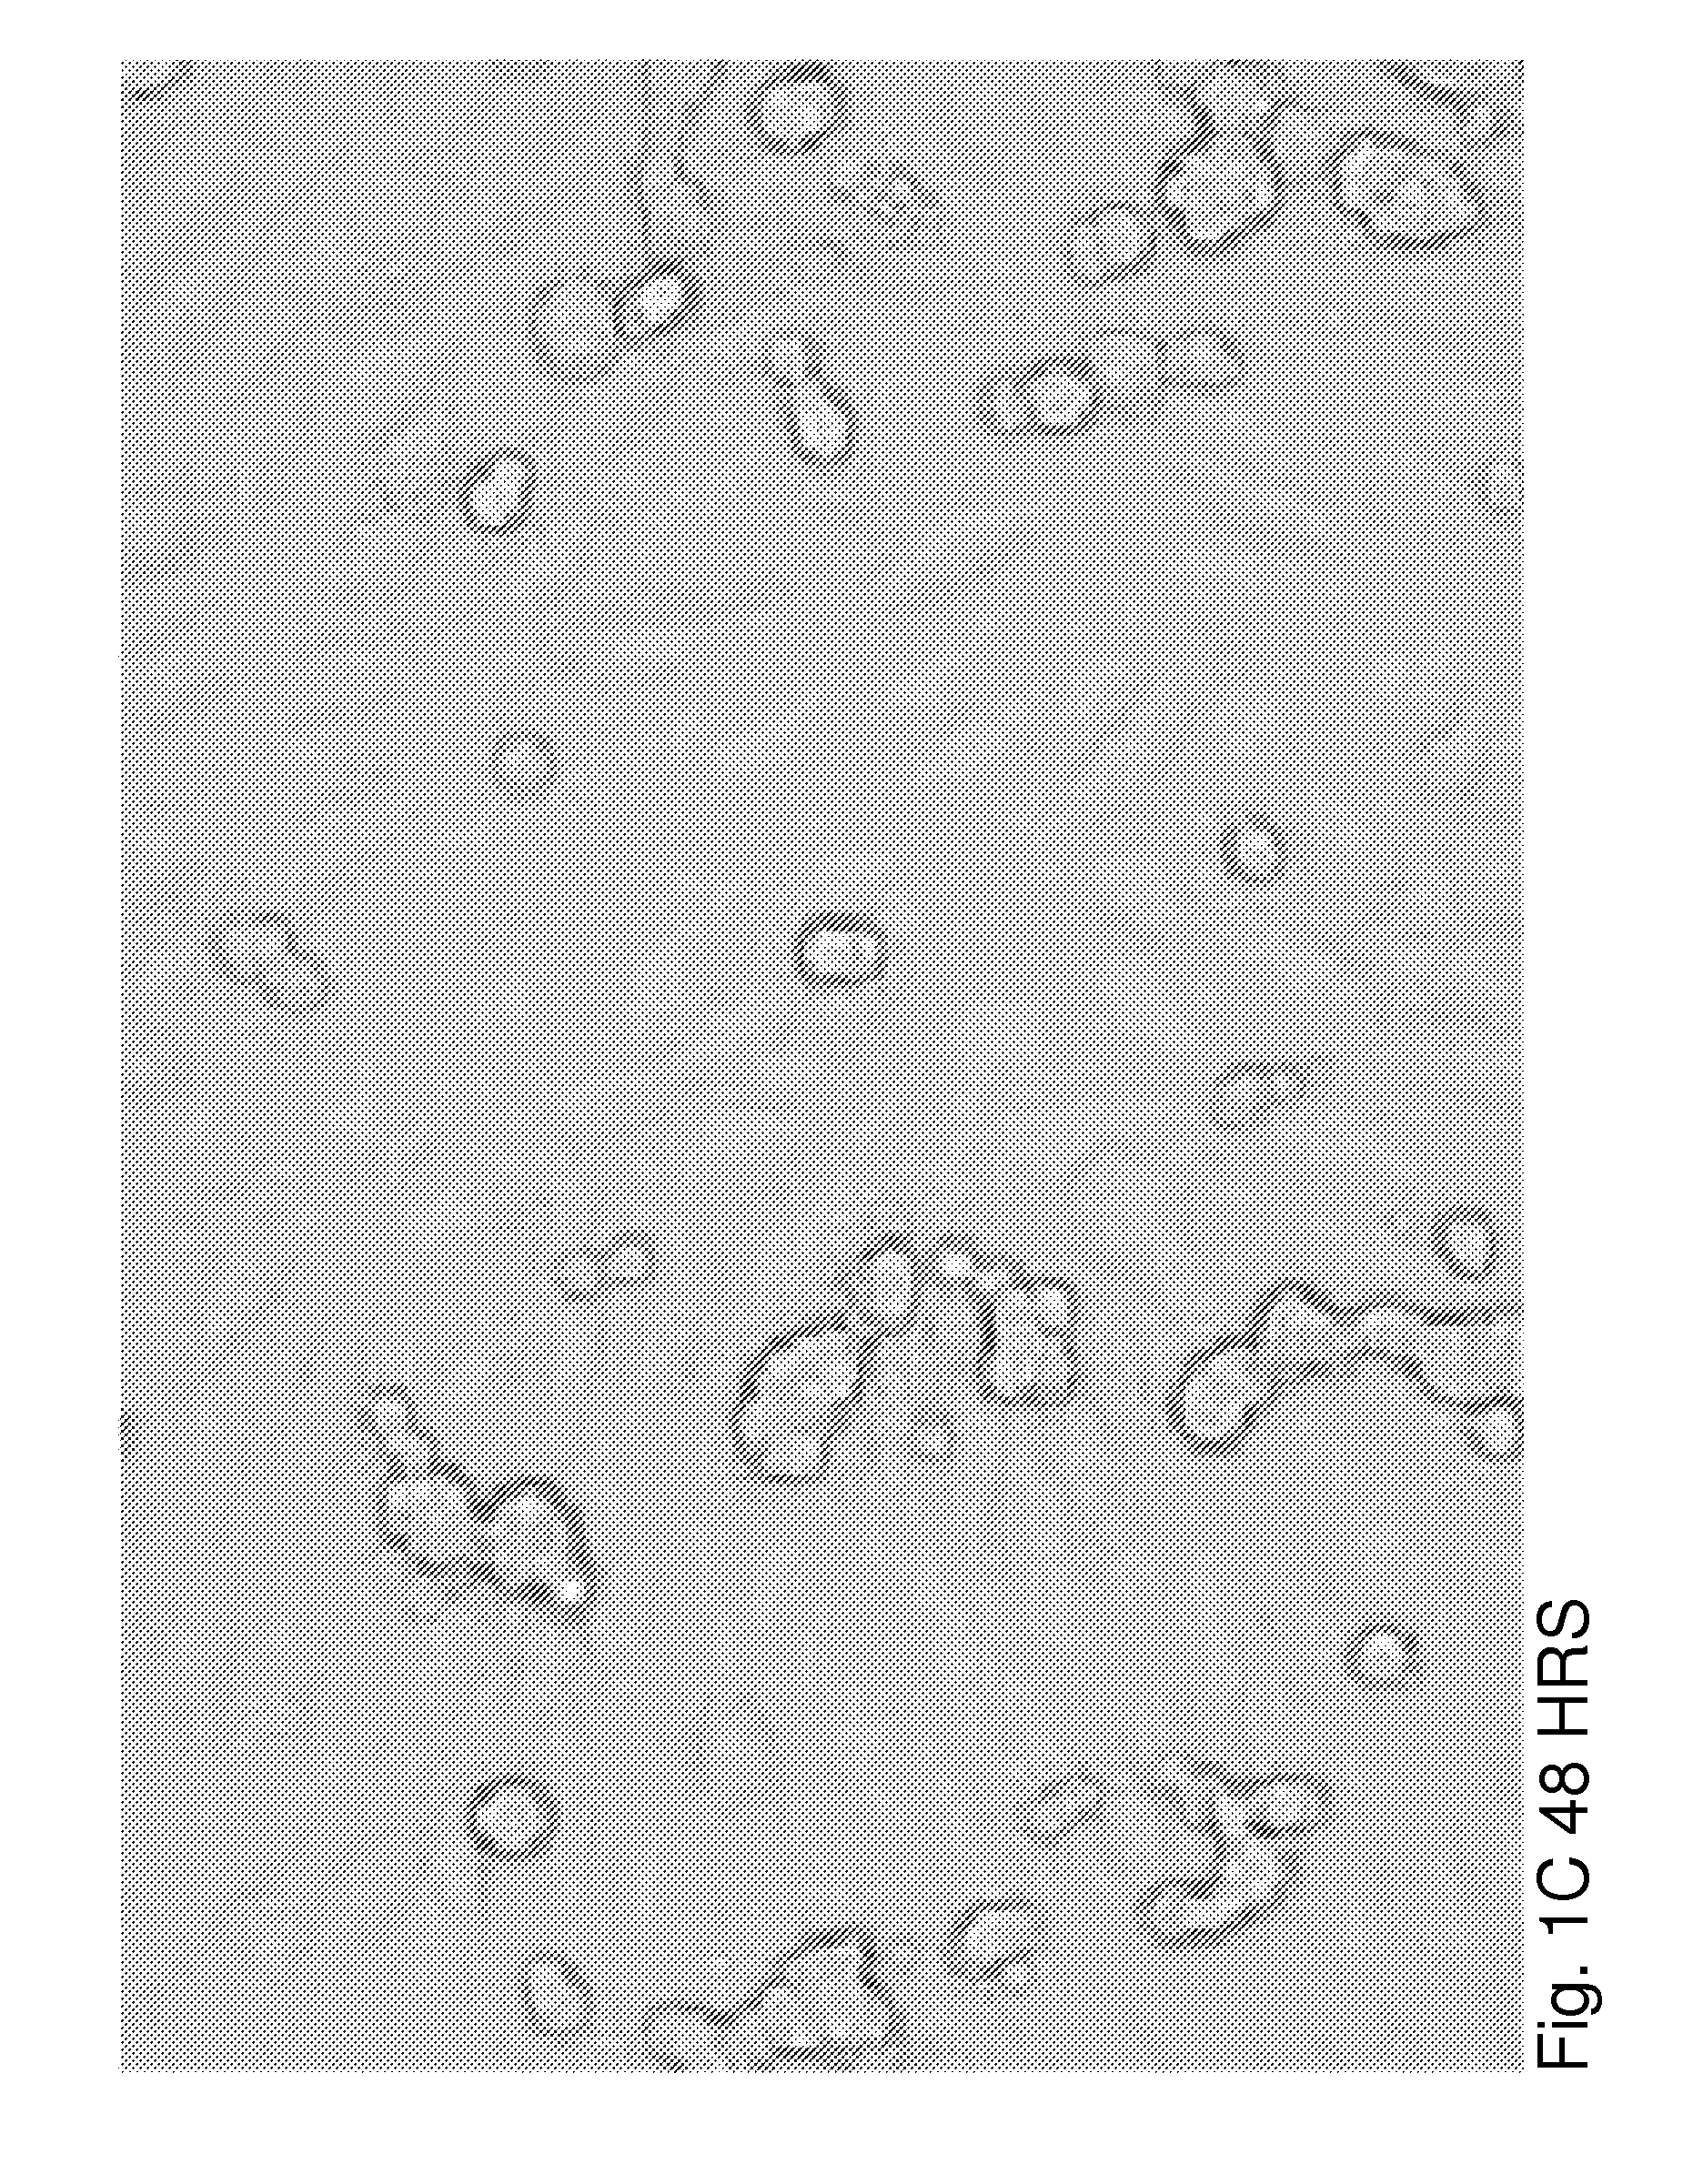 Method for inducing the formation of islet structures and improving beta cell function